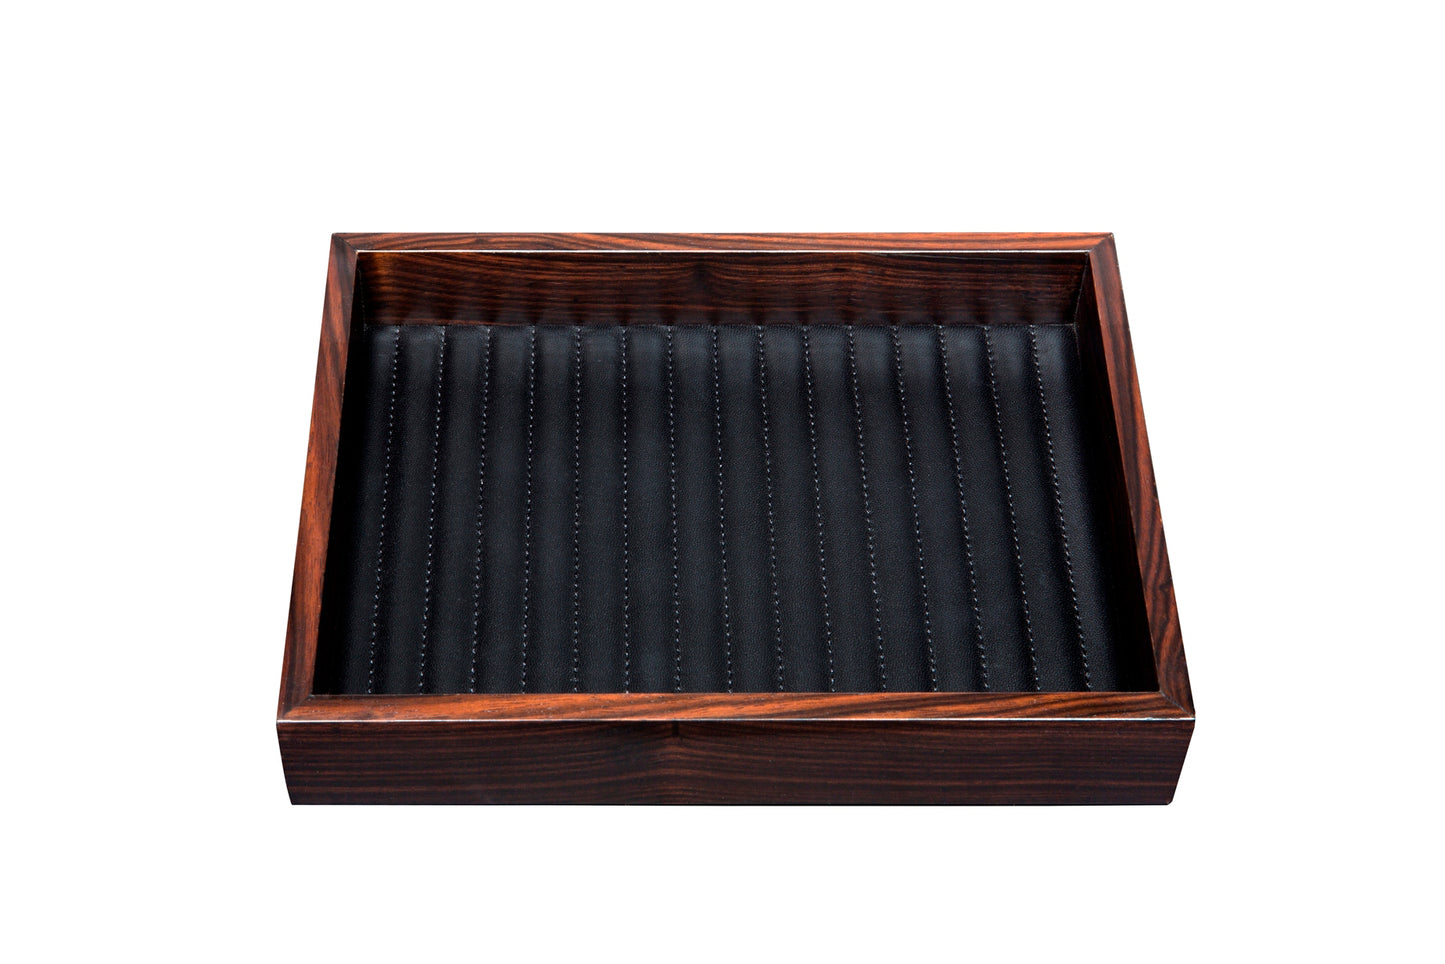 Febe Macassar Ebony Leather Quilted Lines Valet Tray Rectangular